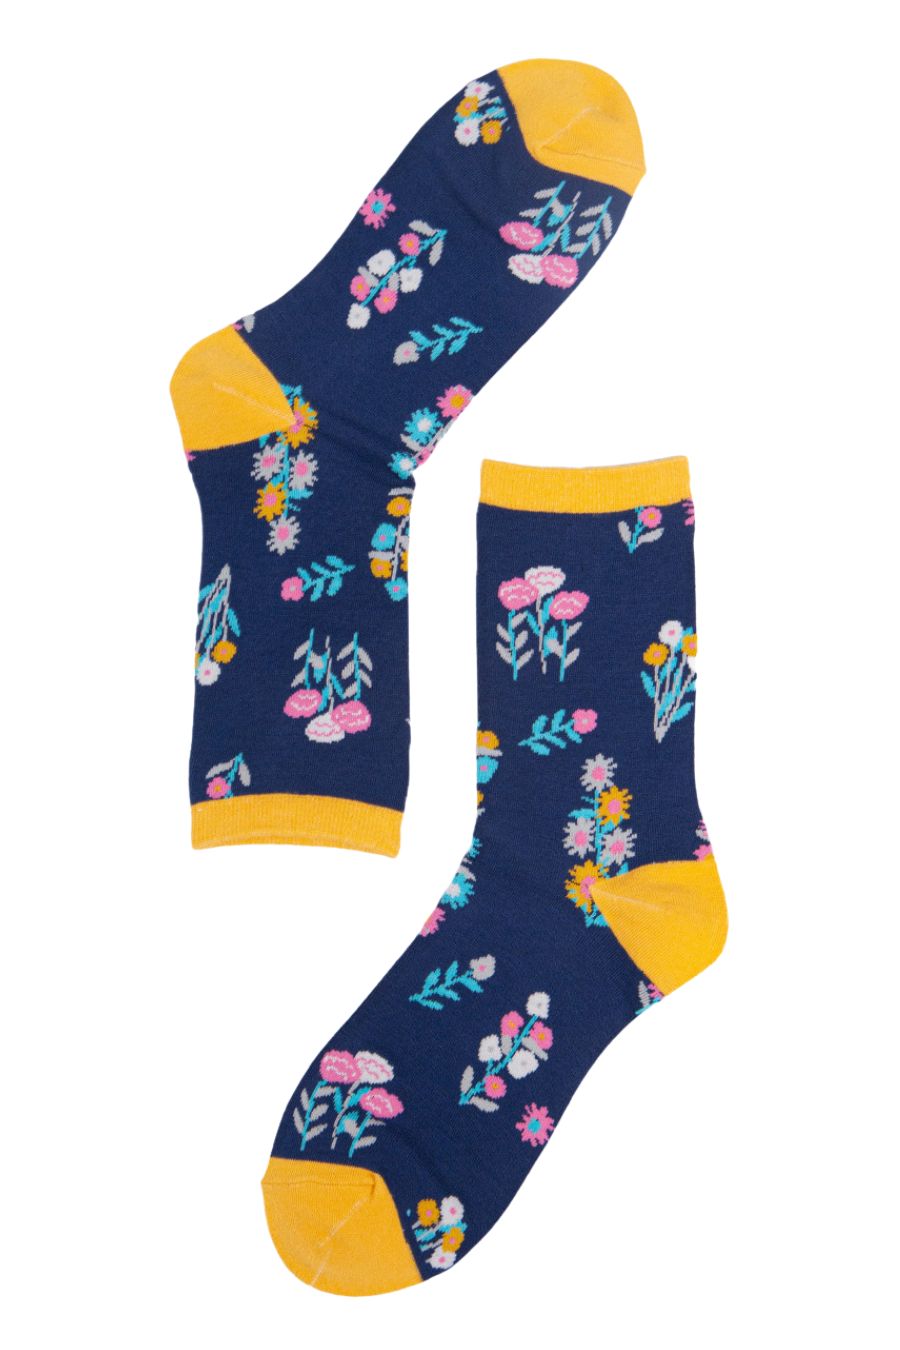 navy blue, yellow wild flower pattern colourful ankle socks